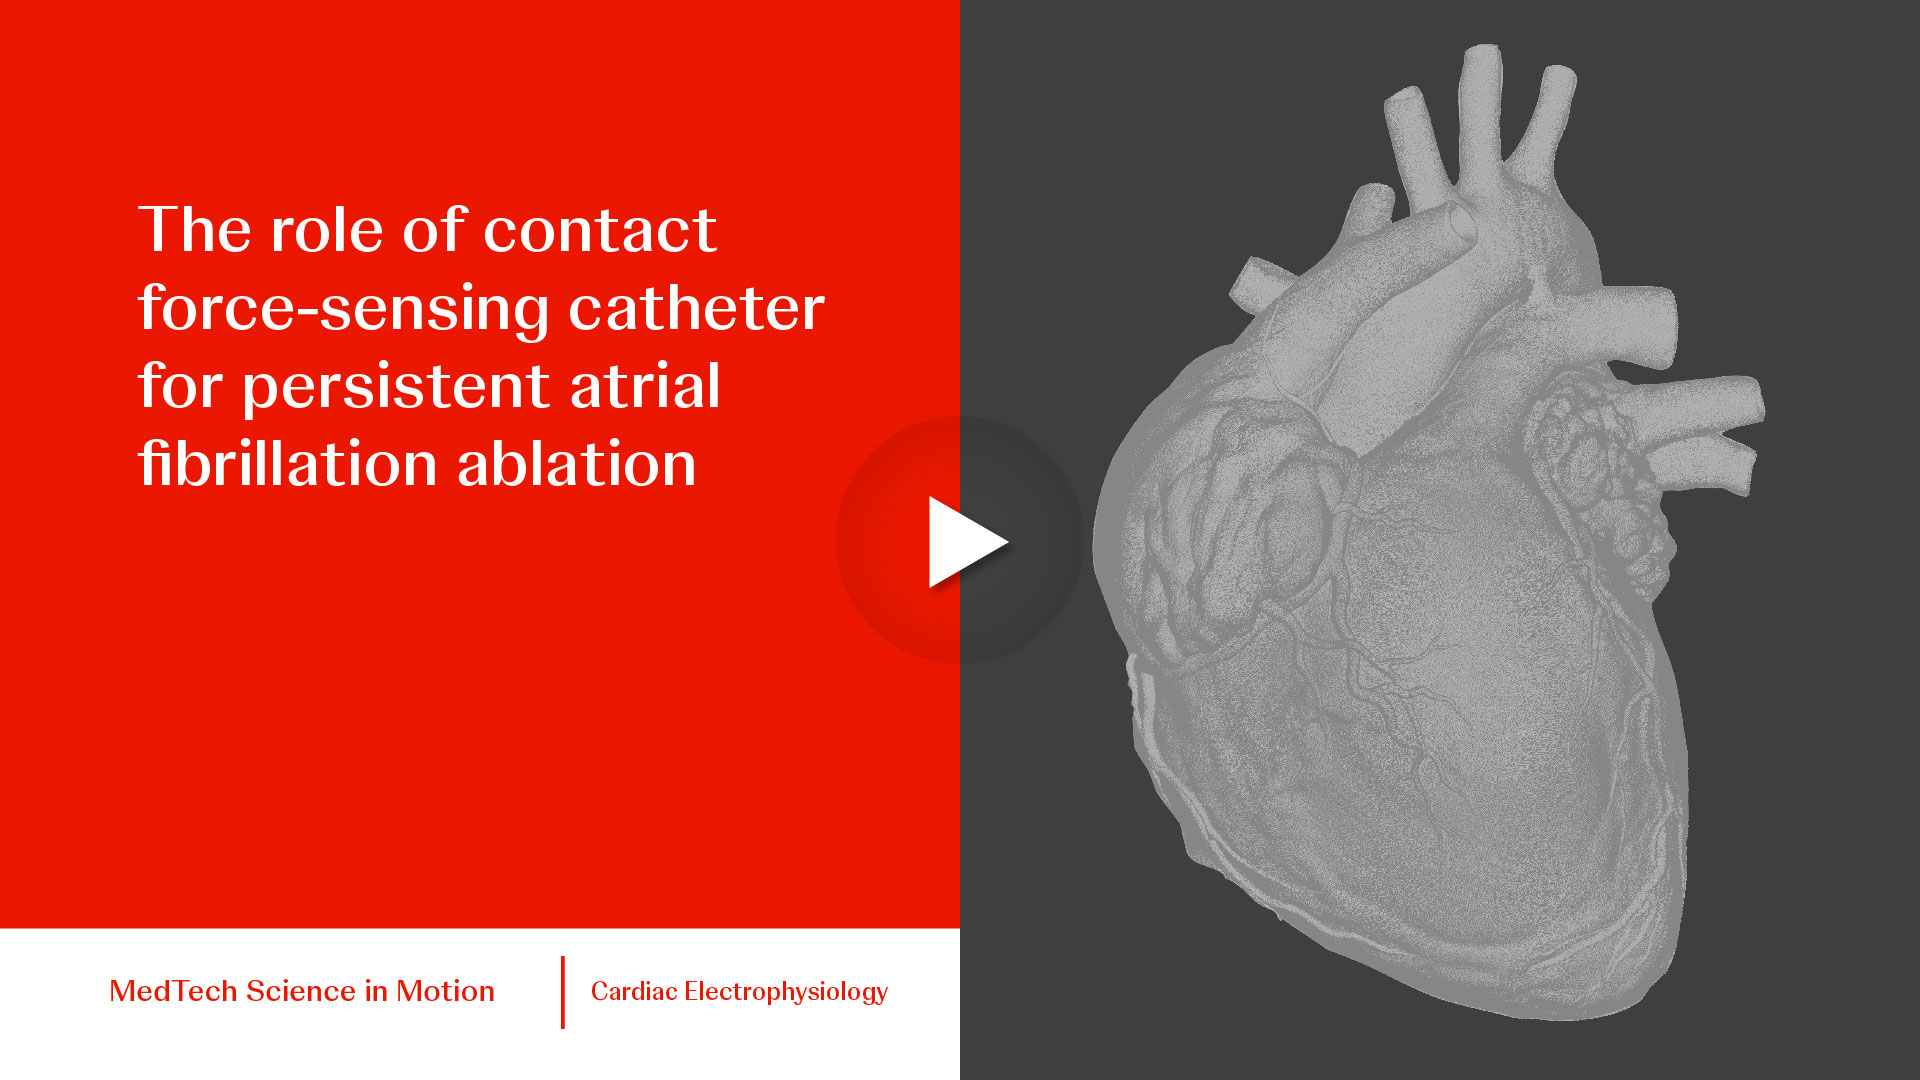 thumb he role of contact force-sensing catheter for persistent atrial fibrillation ablation